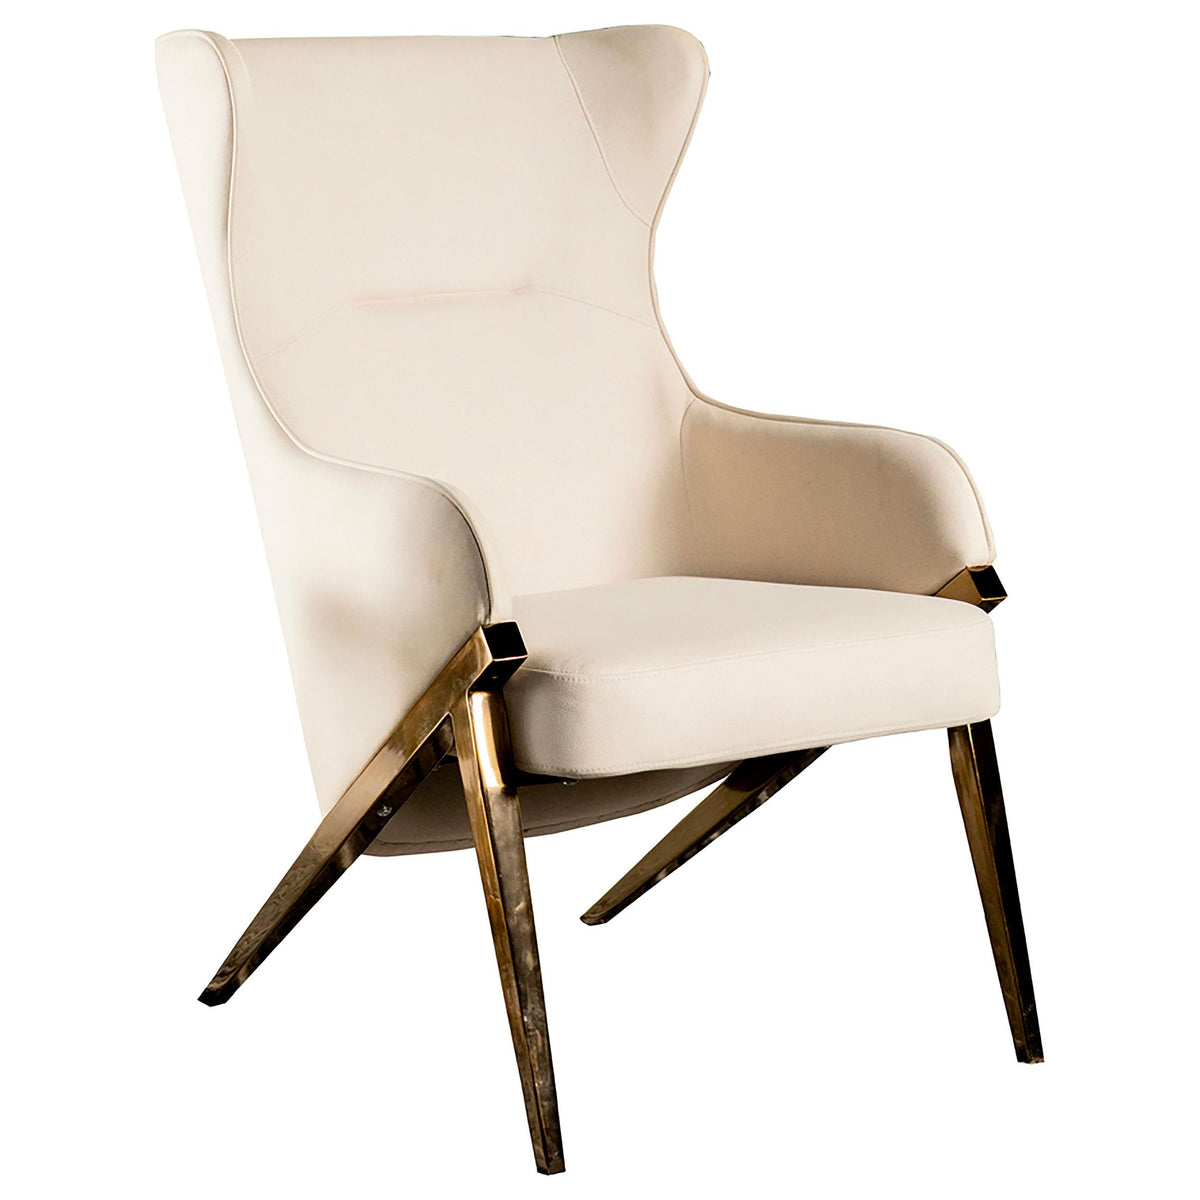 Walker Upholstered Accent Chair Cream and Bronze  Half Price Furniture